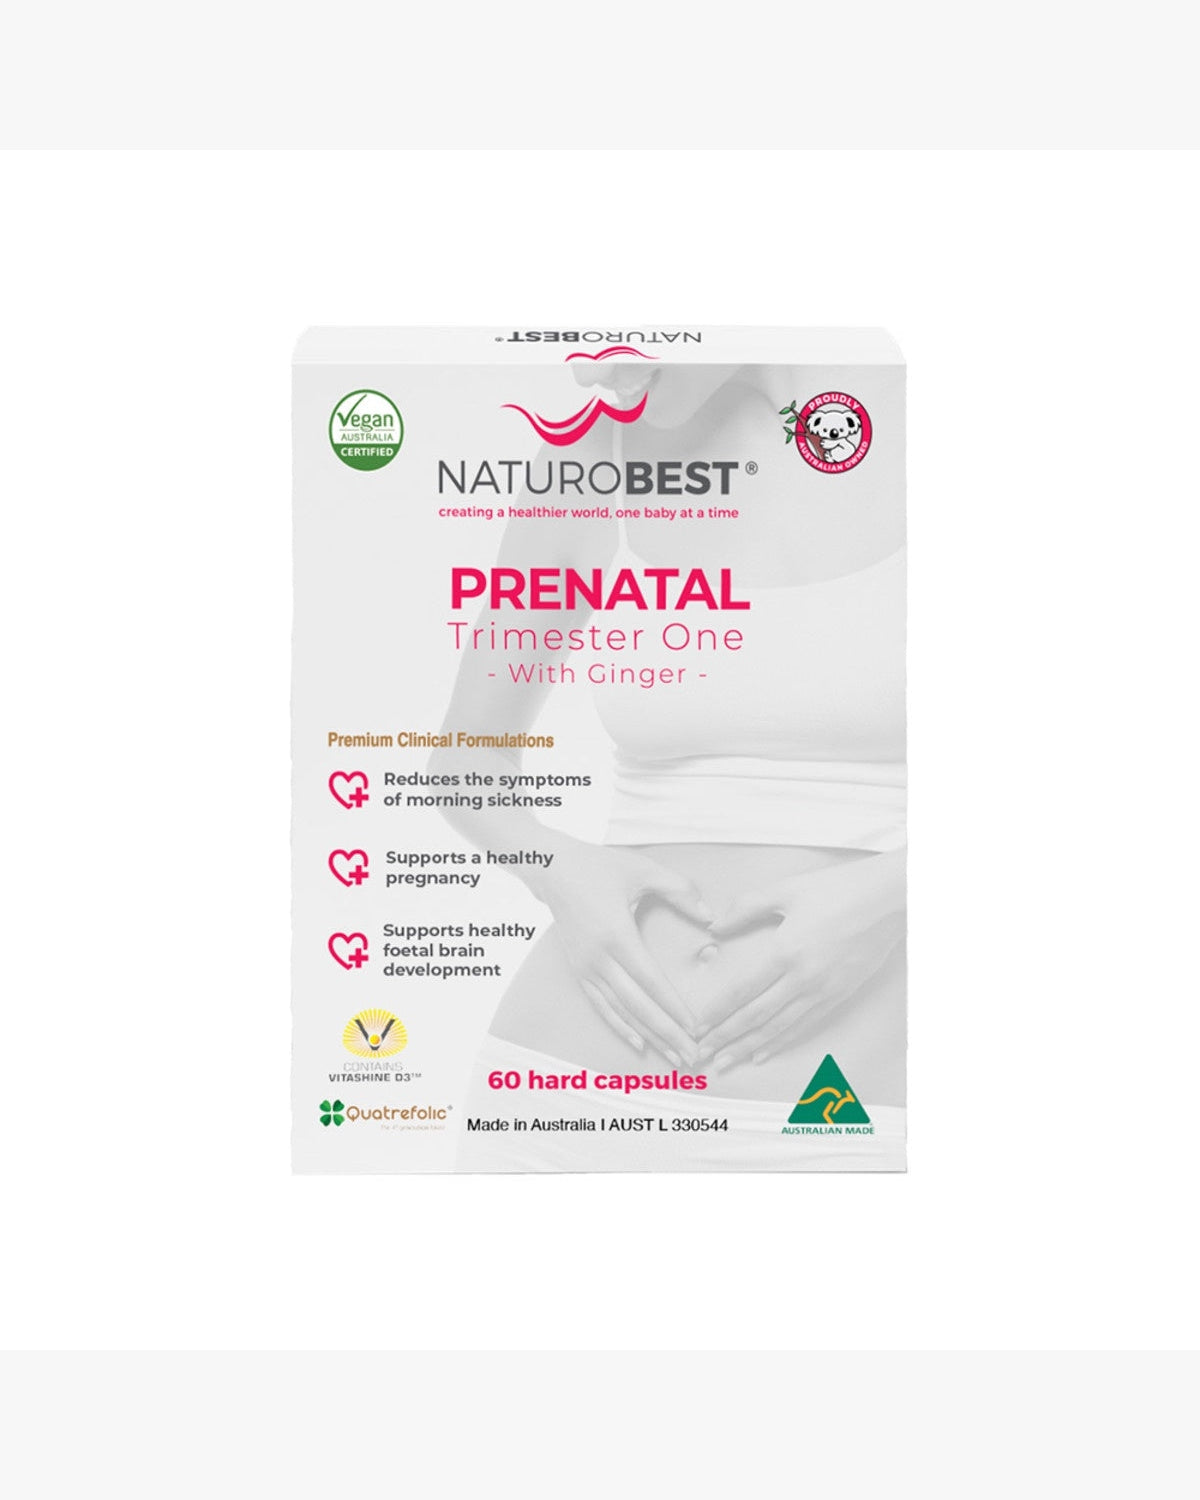 NaturoBest Prenatal Trimester One with Ginger 60c